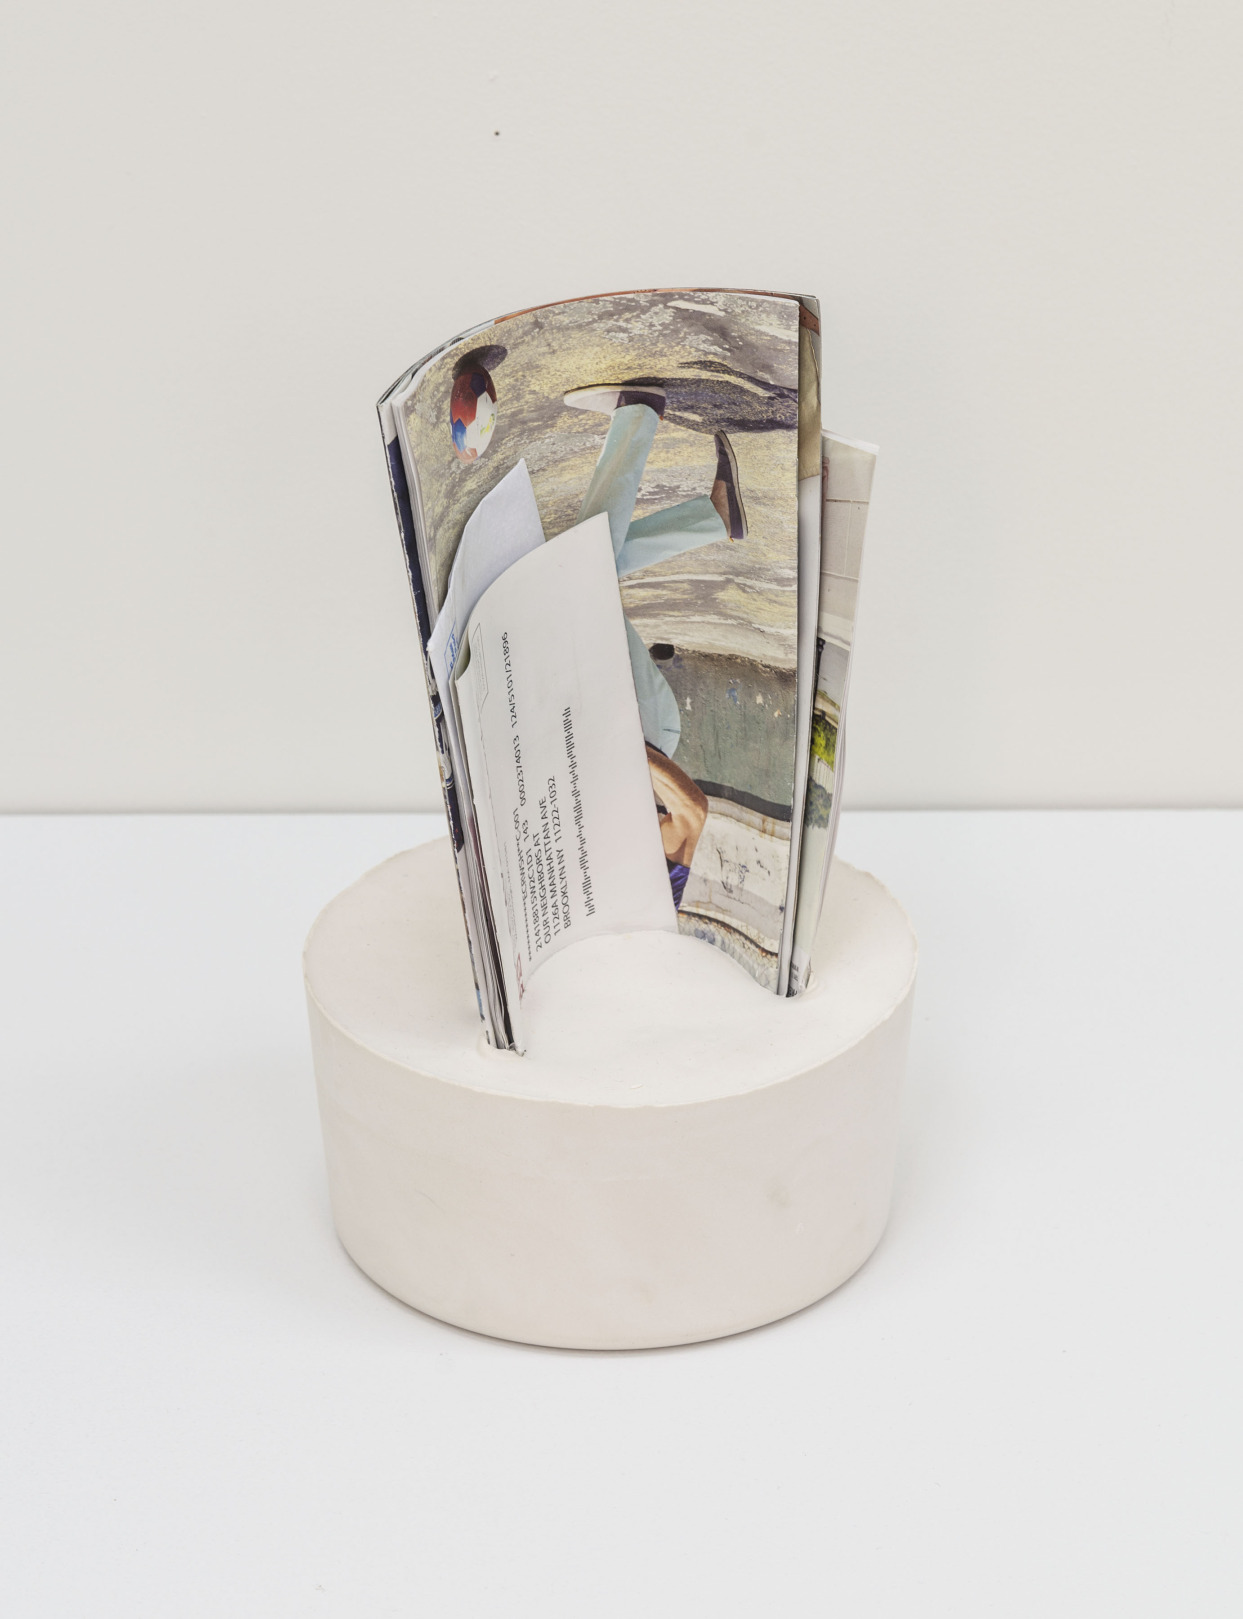 Dylan Bailey, Untitled, 2014, mail and plaster, 12.5h x 8w x 8d in.